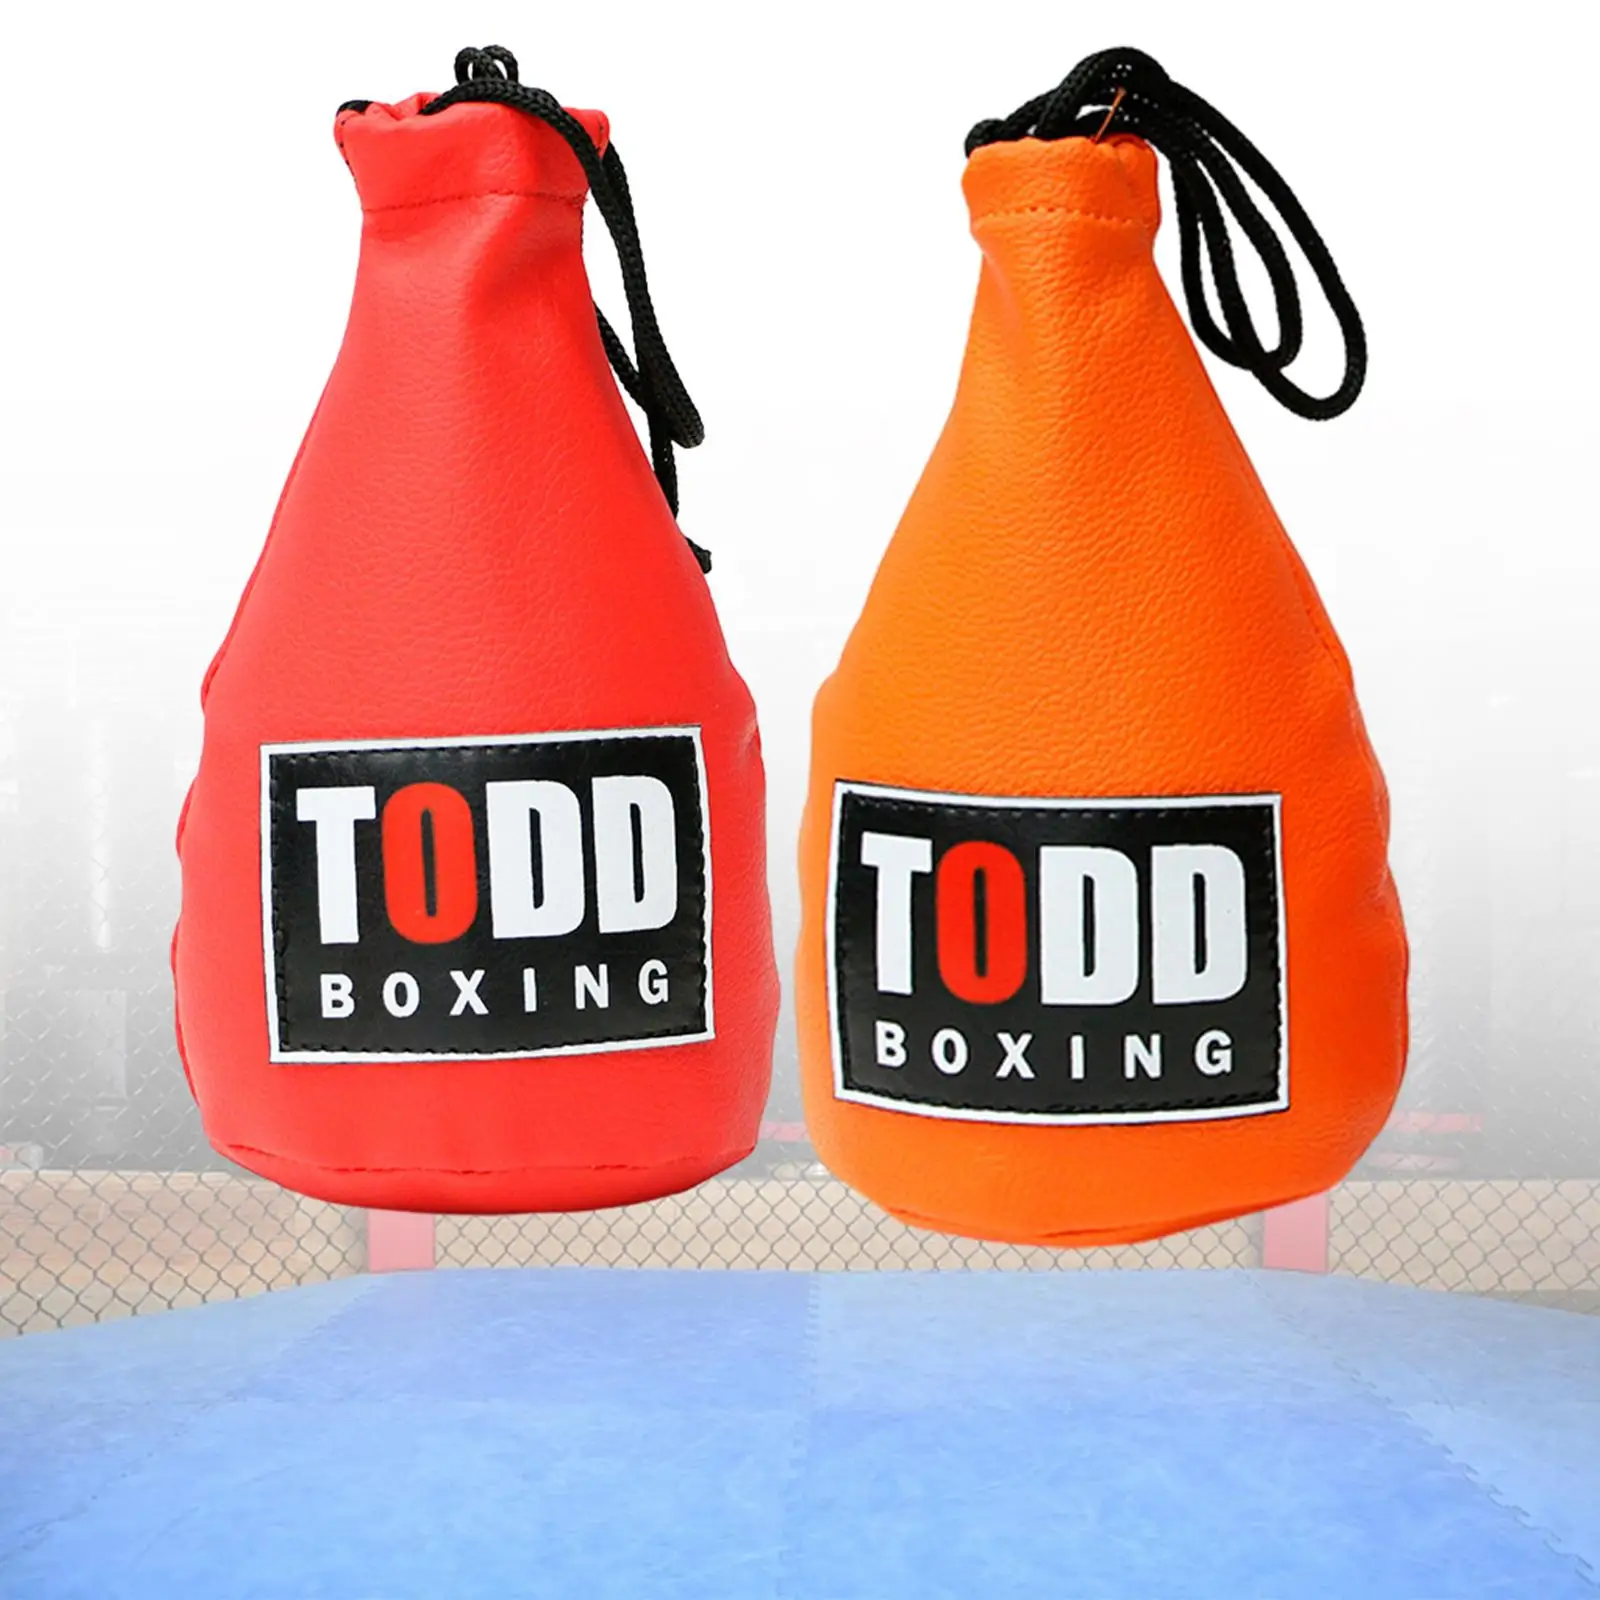 Boxing Dodge Speed Bag Hanging Equipment Boxing Dodge Training Bag for Reaction Hand Eye Coordination Agility Indoor Fitness